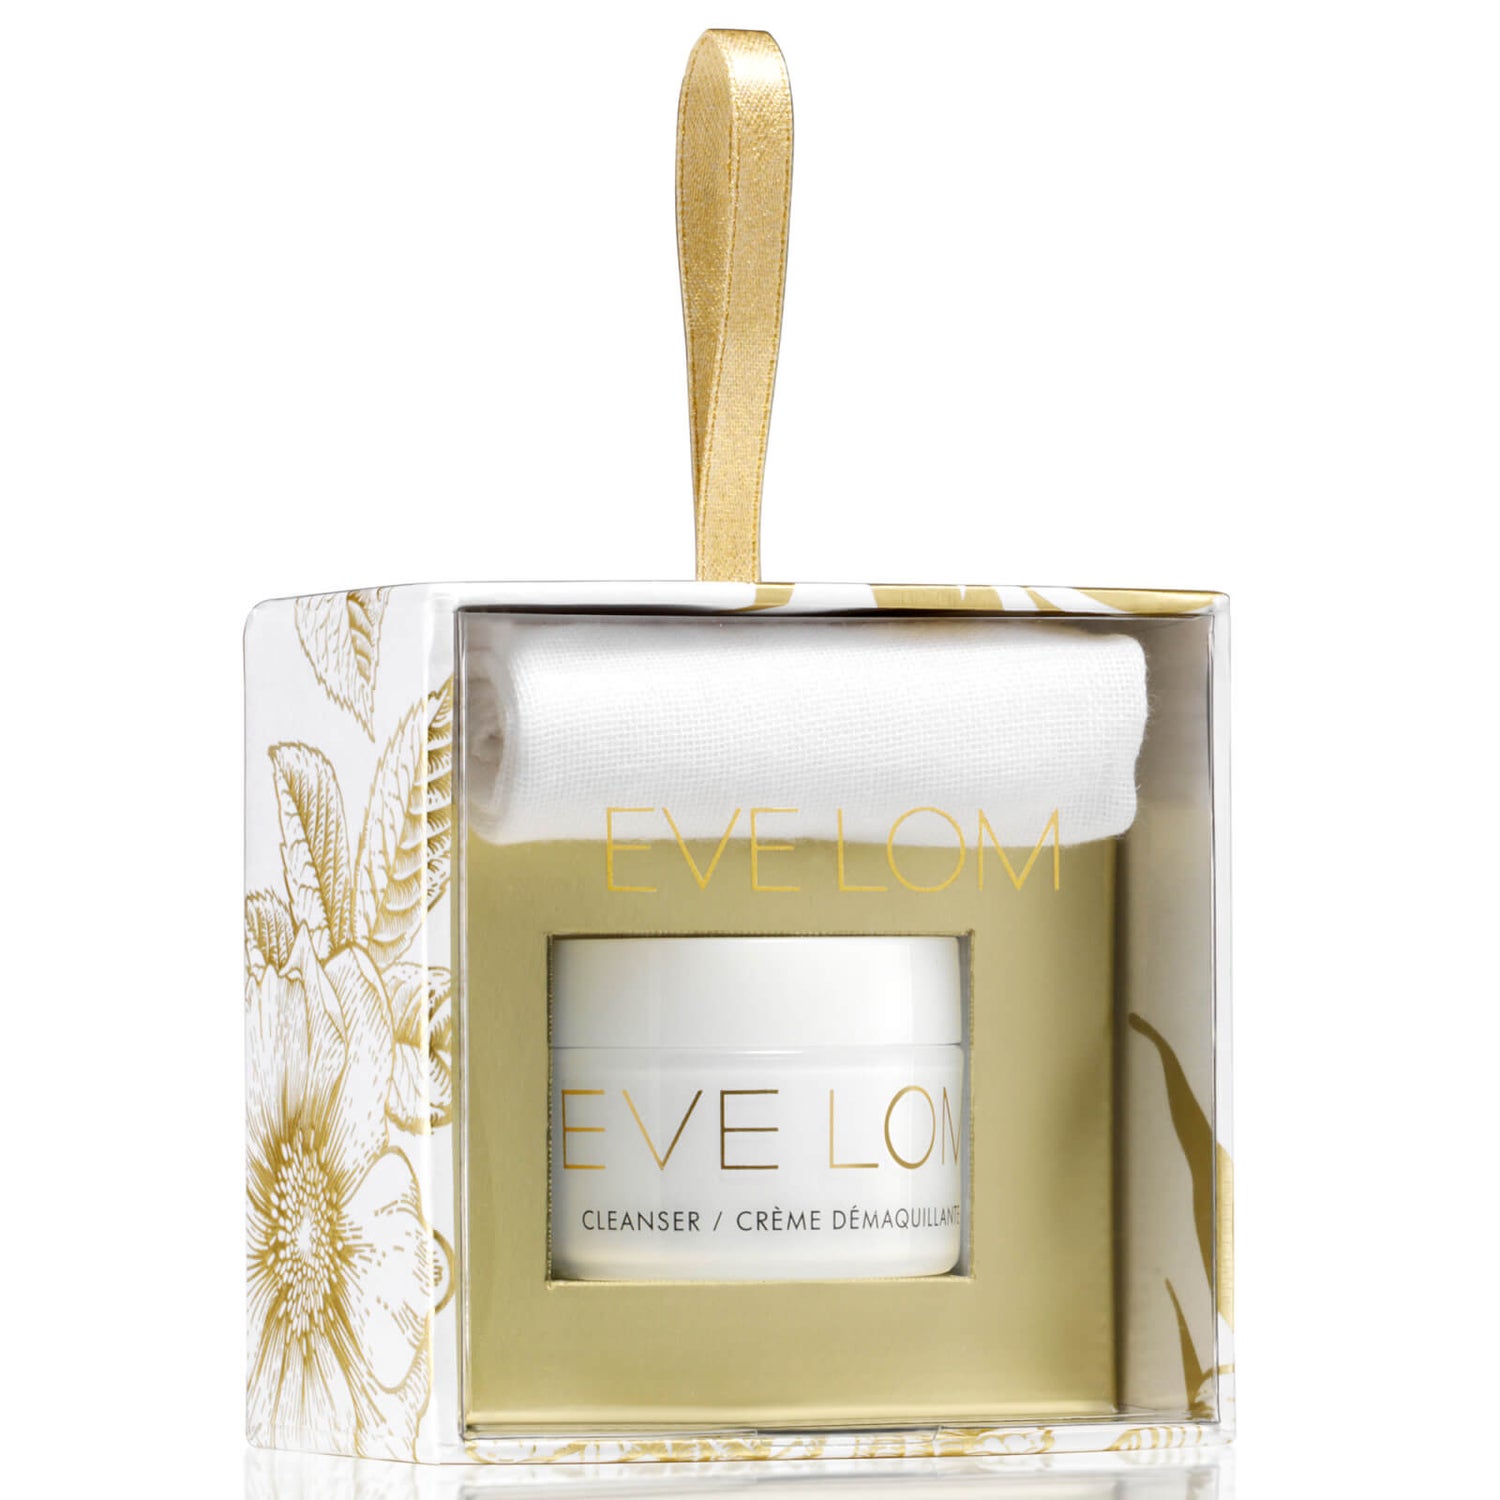 Eve Lom Iconic Cleanse Ornament Holiday 2022 (Worth $24.00)